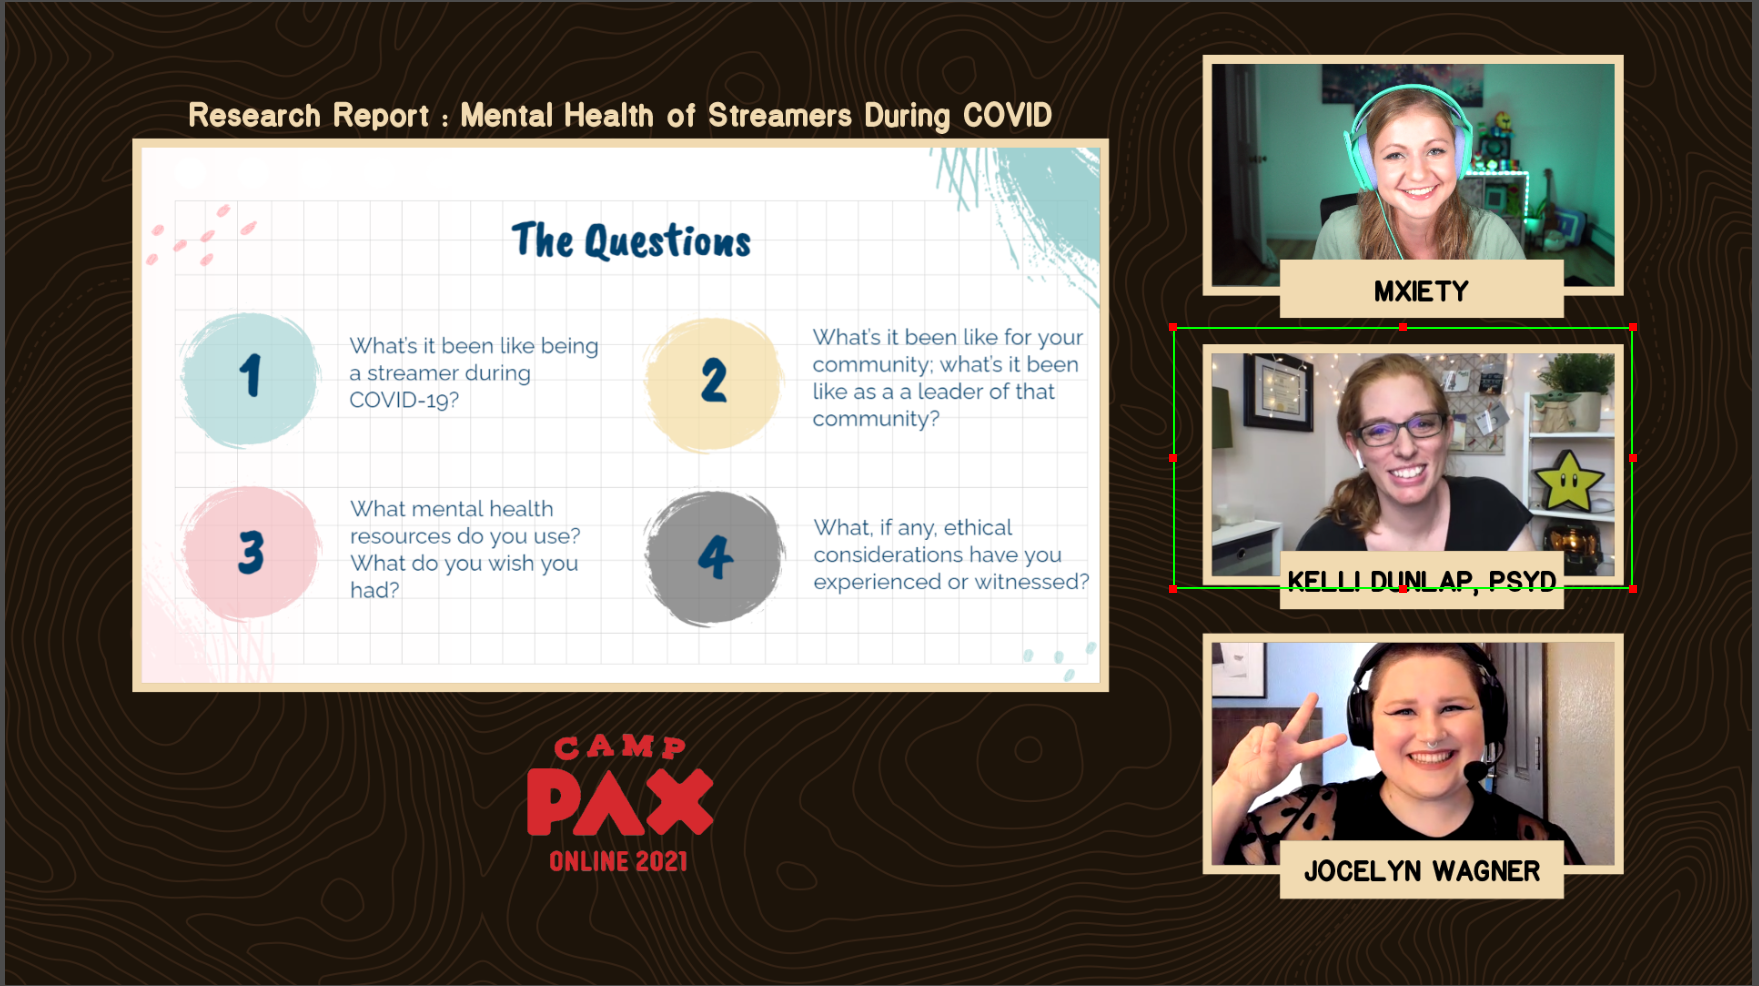  Mxiety on a Panel online panel on Covid and streamer Mental Health with Dr Kelli Dunlap and Jocelyn Wagner 